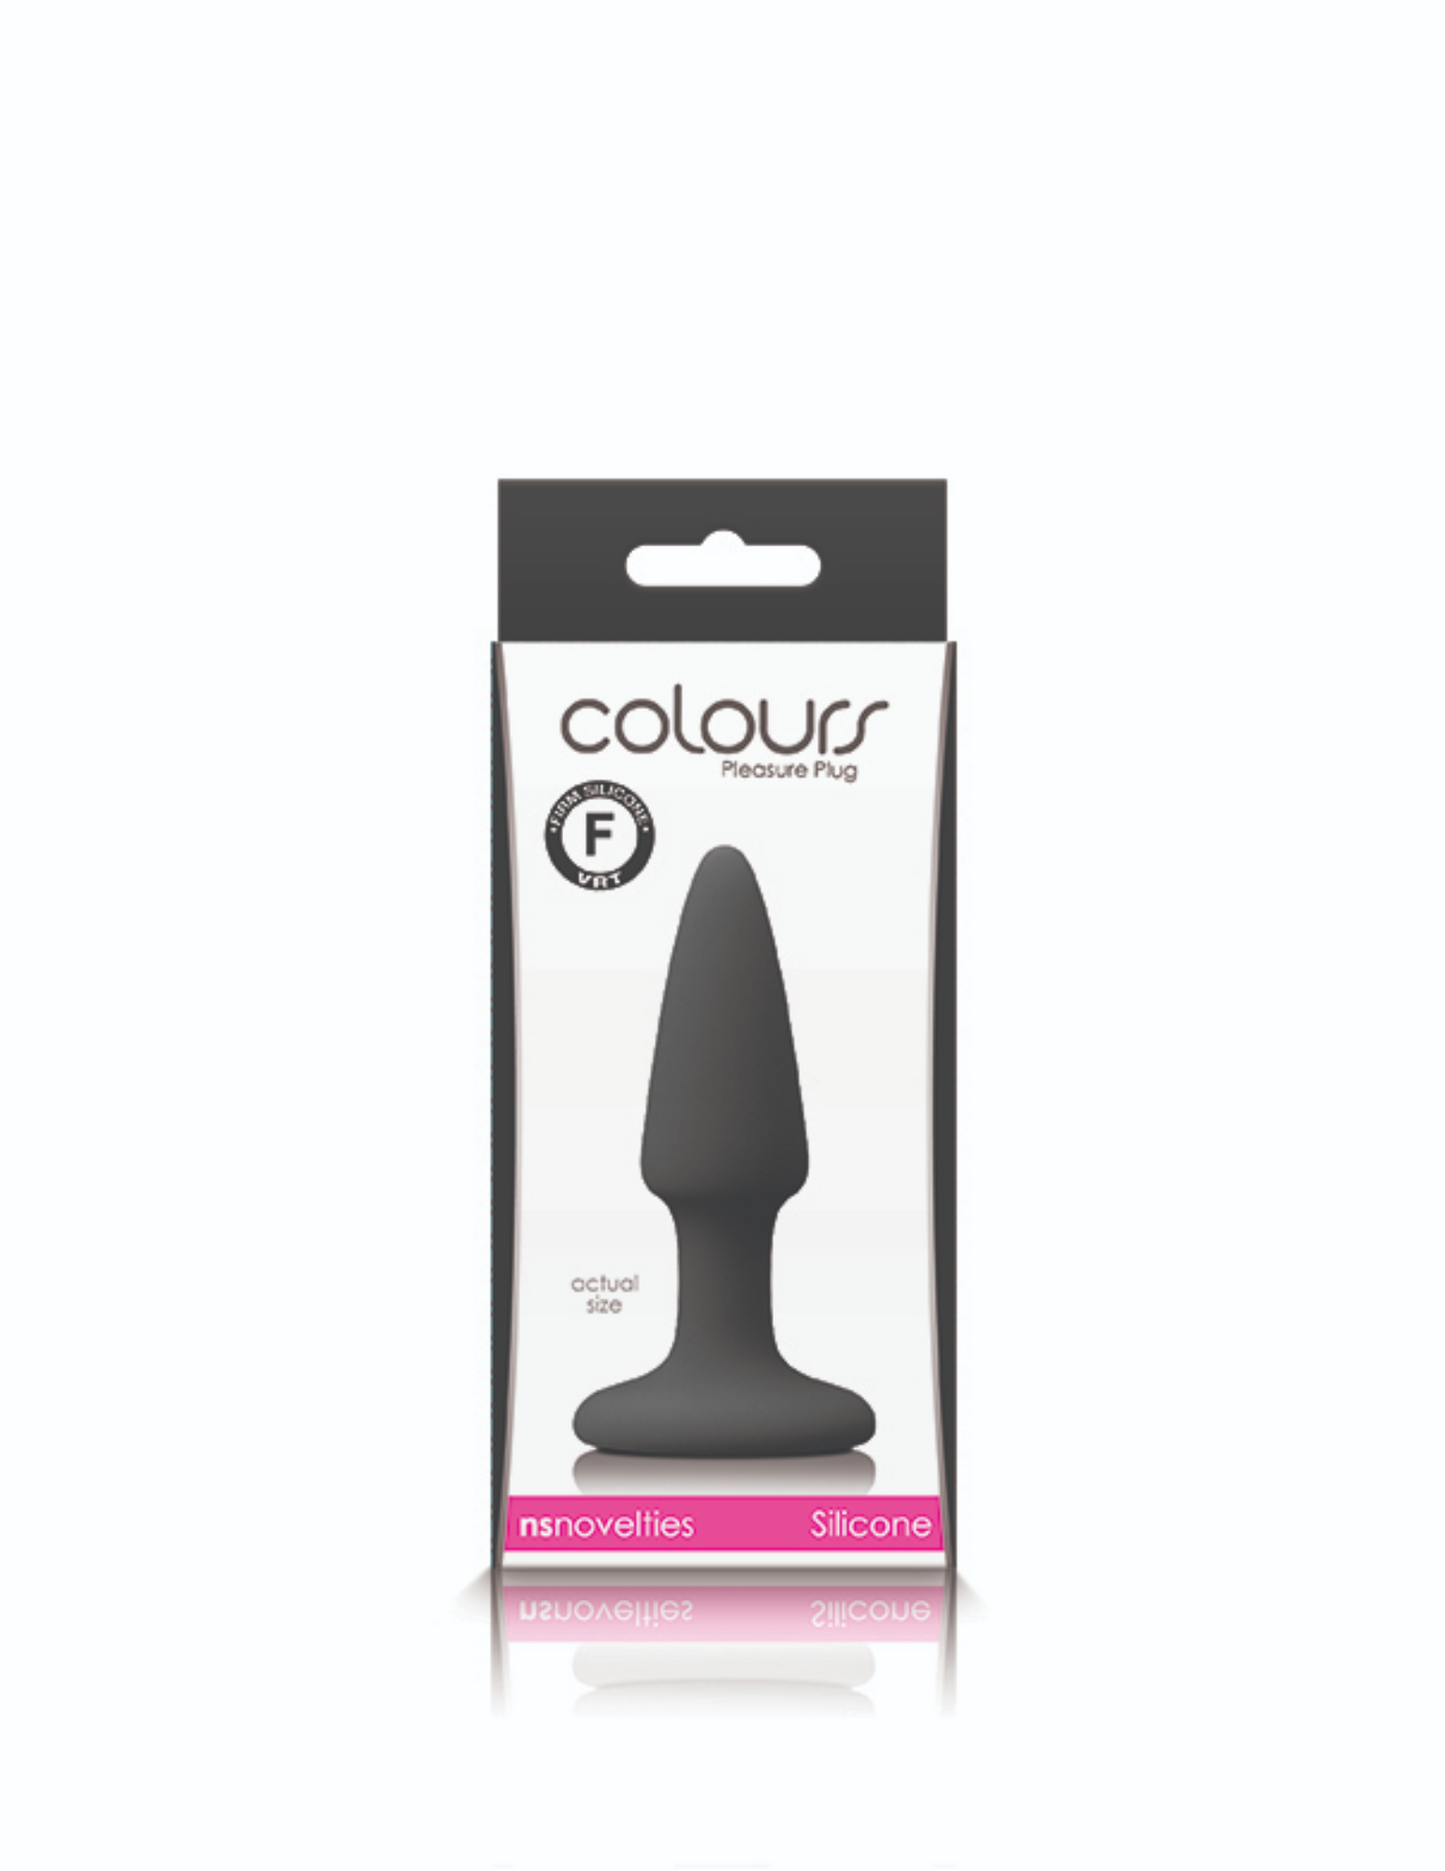 Photo of the front of the box for the Colours Pleasure Plug Mini from NS Novelties (black).